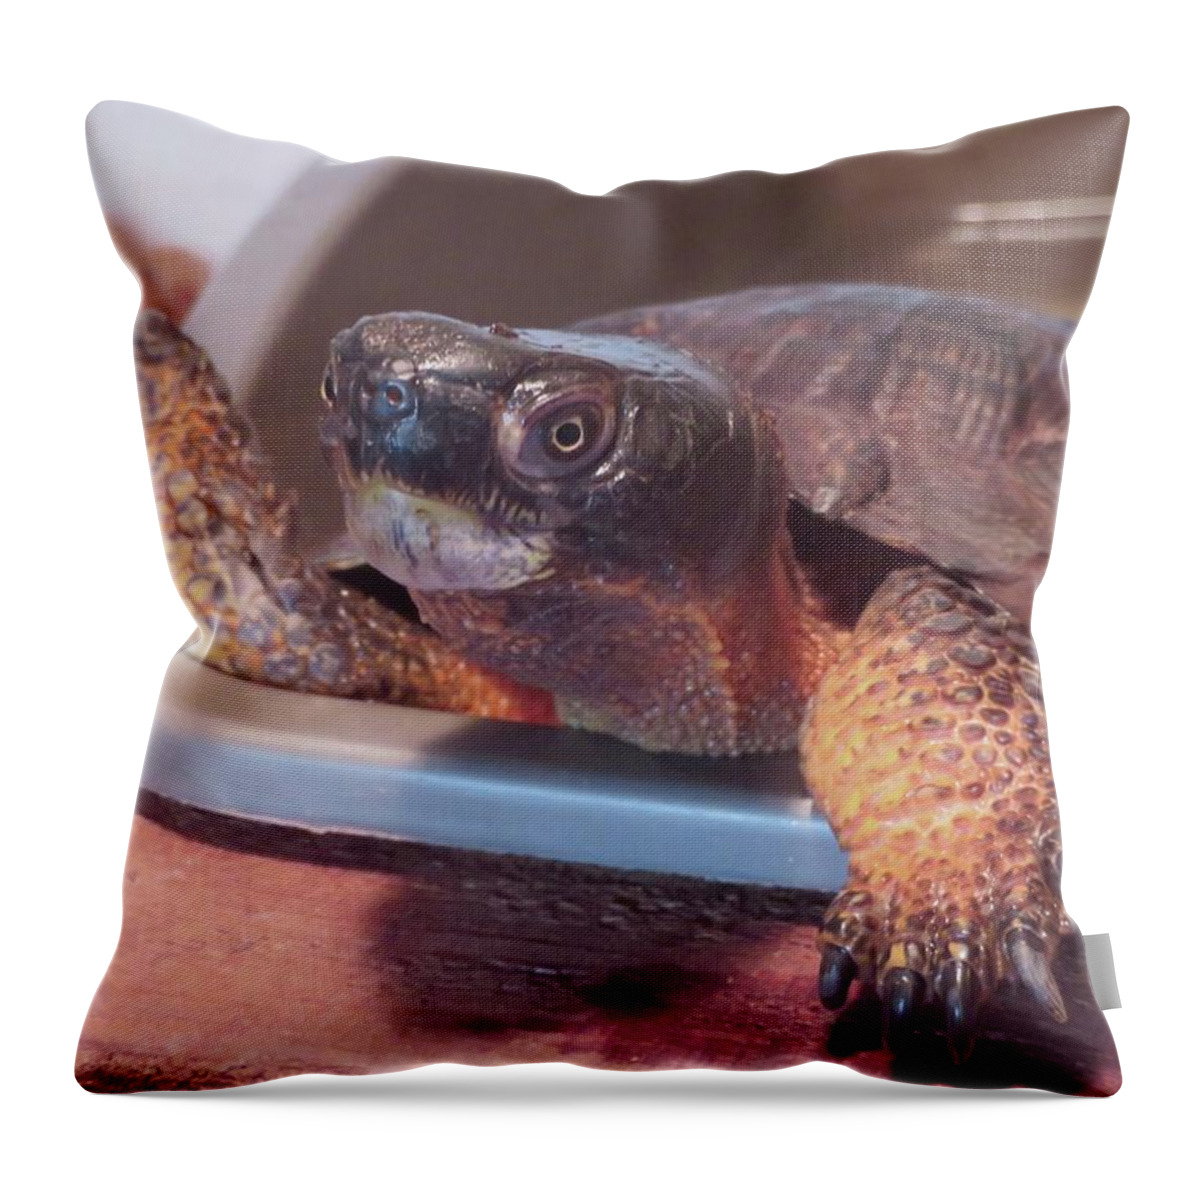 Turtles Throw Pillow featuring the photograph Wood Turtle by Melinda Saminski